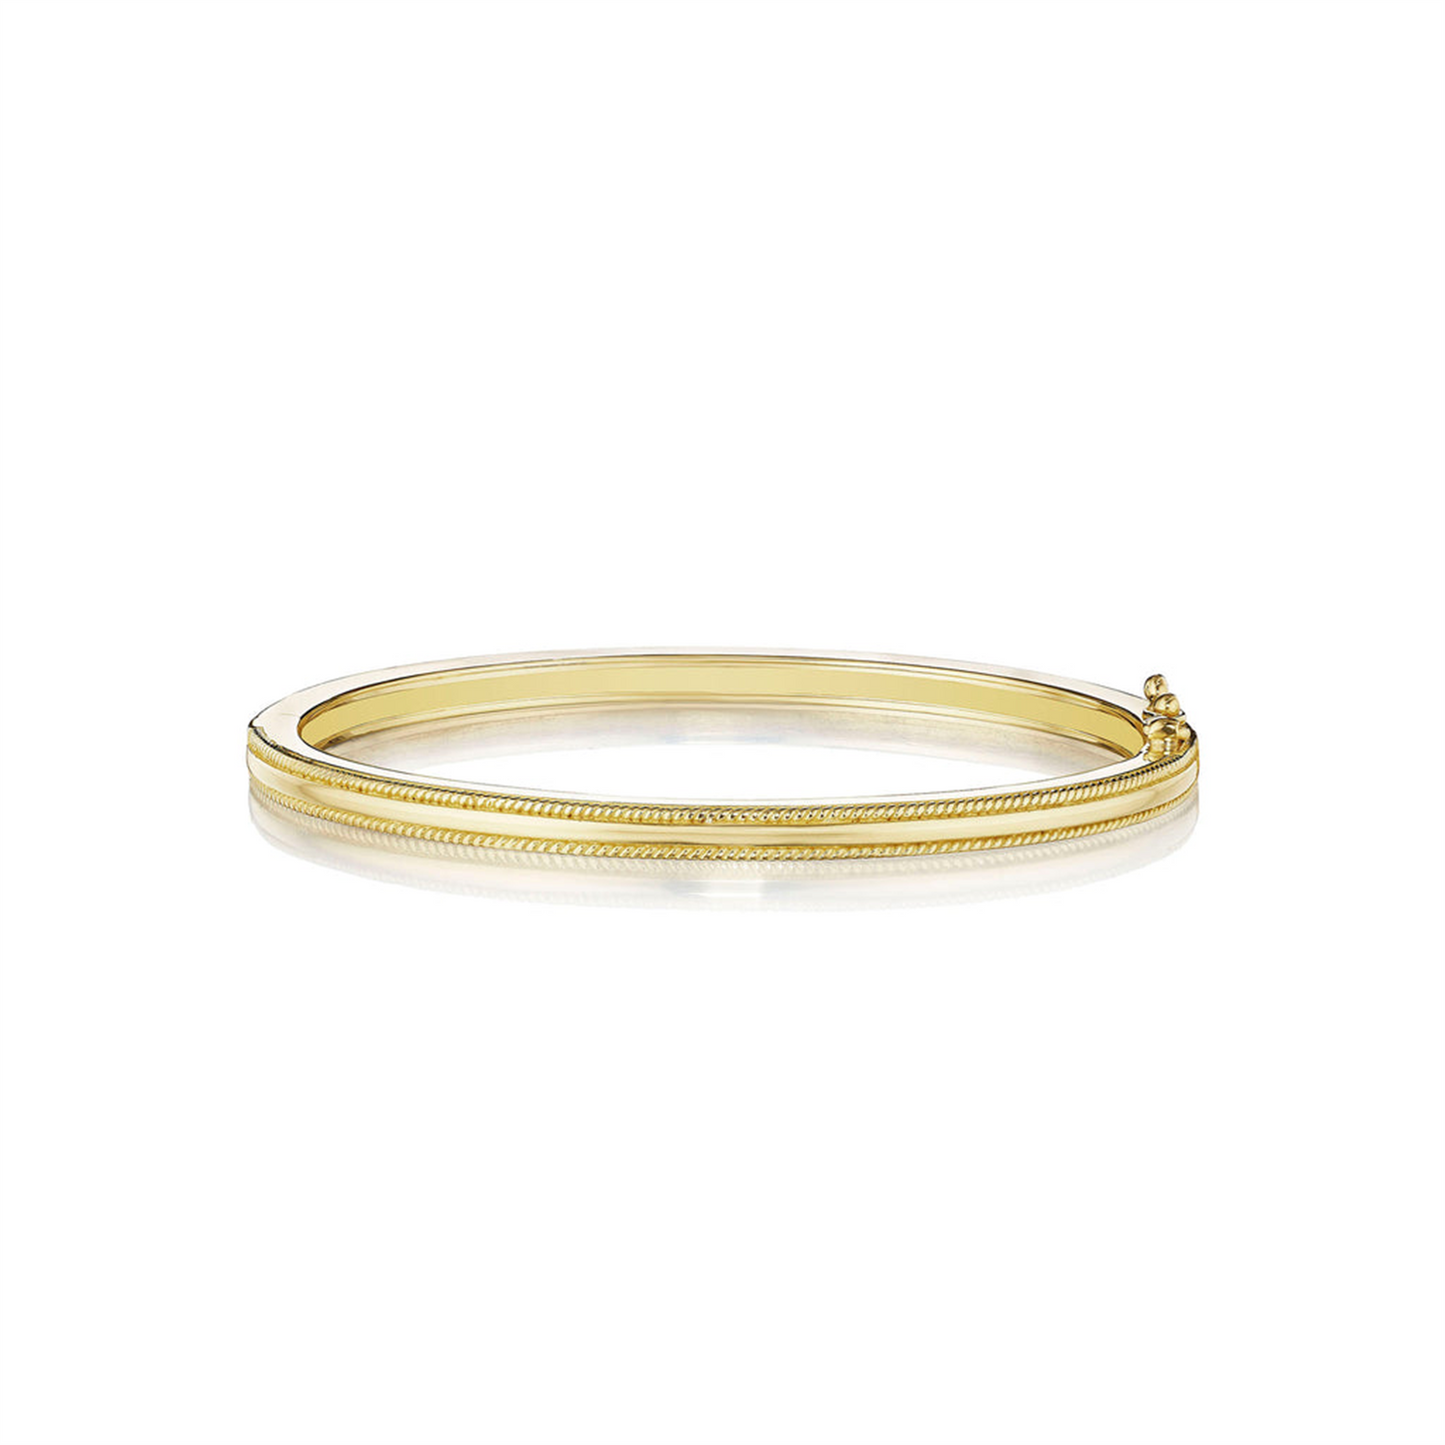 Penny Preville Gold Thin Bangle with Twist Edges